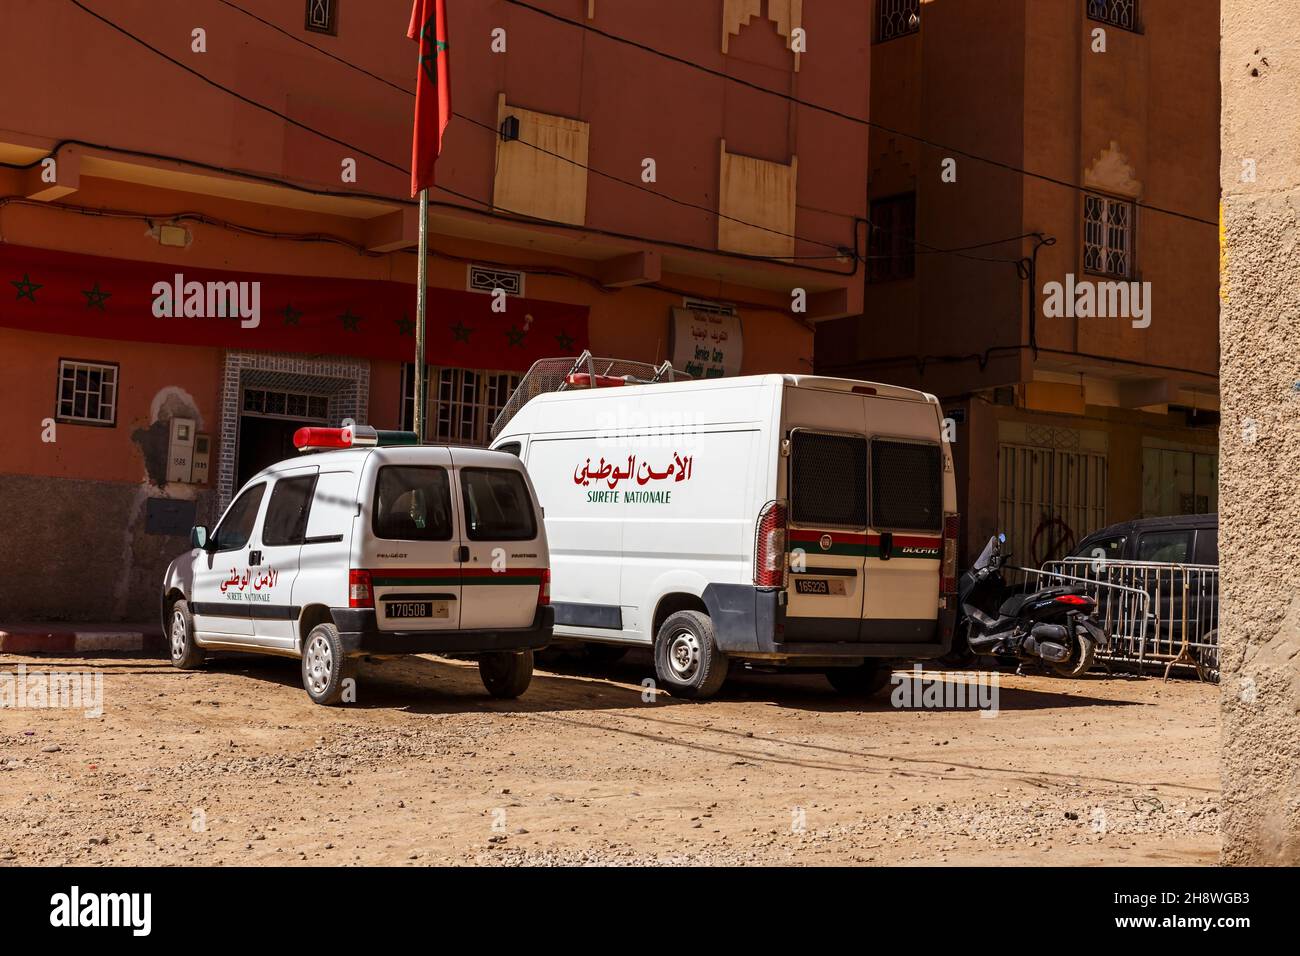 Sijilmassa, Morocco - October 23, 2015: Cars of the General Directorate of National Security are parked on the street near the building. Moroccan Poli Stock Photo